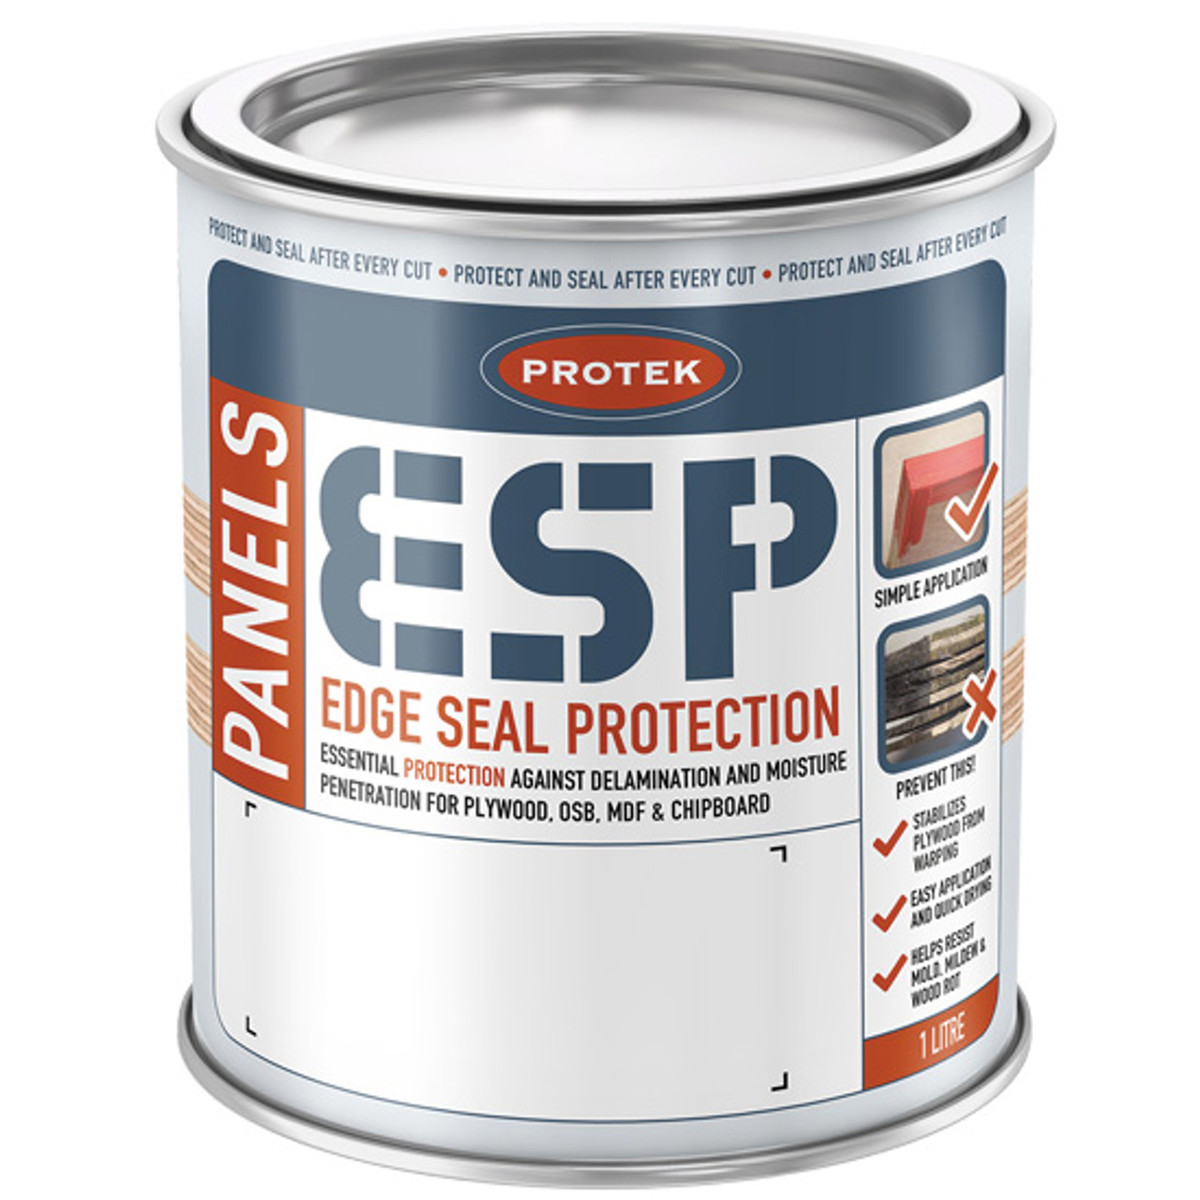 Protek Edge Seal Protection (ESP) for Plywood